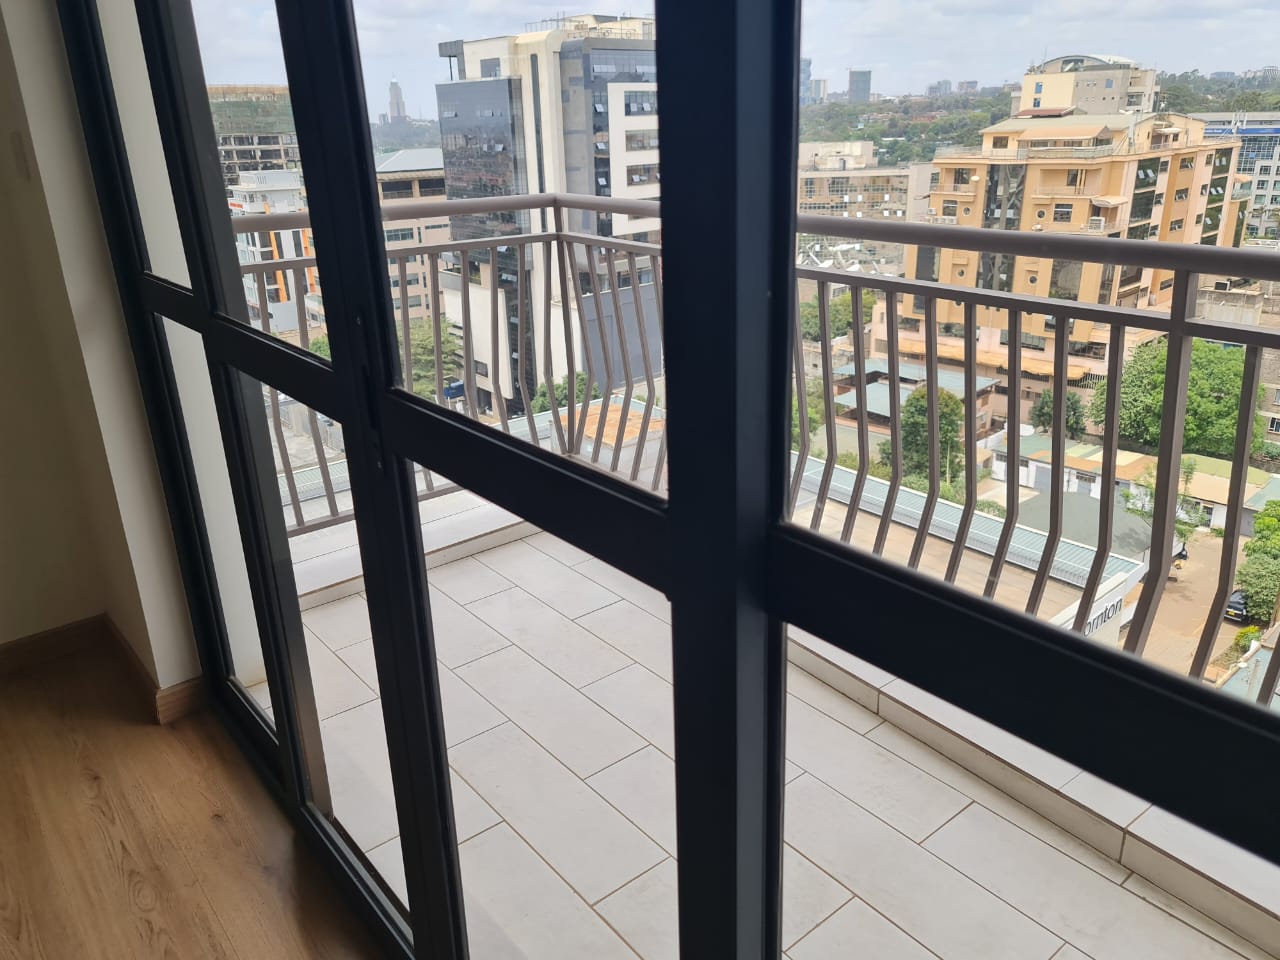 4 Bedroom New Penthouse for Rent in the heart of Westlands with great views, lift, borehole, power backup generator For Rent at Ksh160k (13)